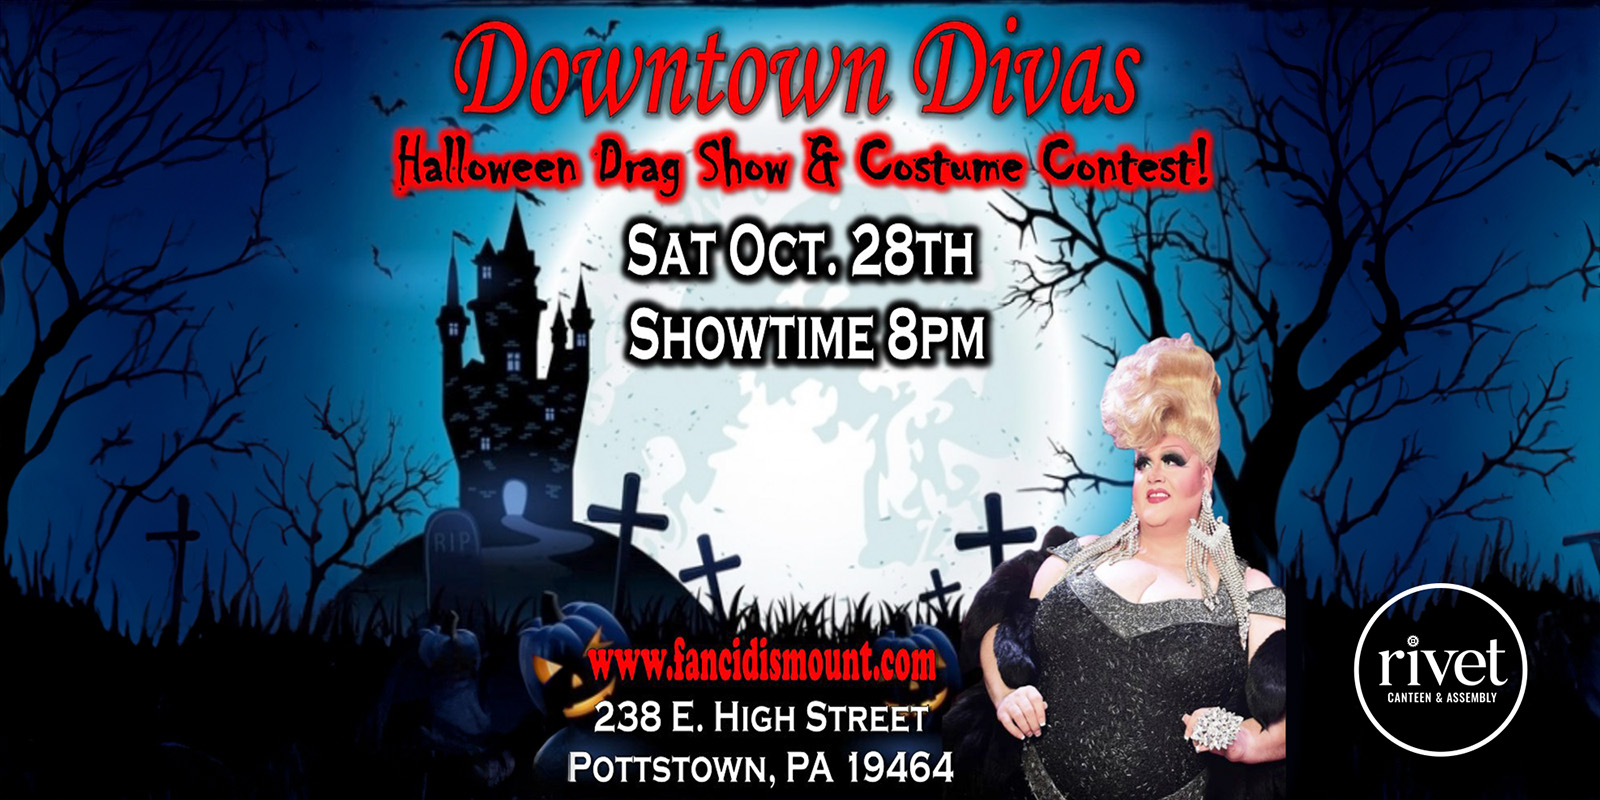 Downtown Divas: Halloween Drag Show and Costume Contest at Rivet: Canteen & Assembly on Saturday, October 28th, starting at 8PM. Tickets on sale now!